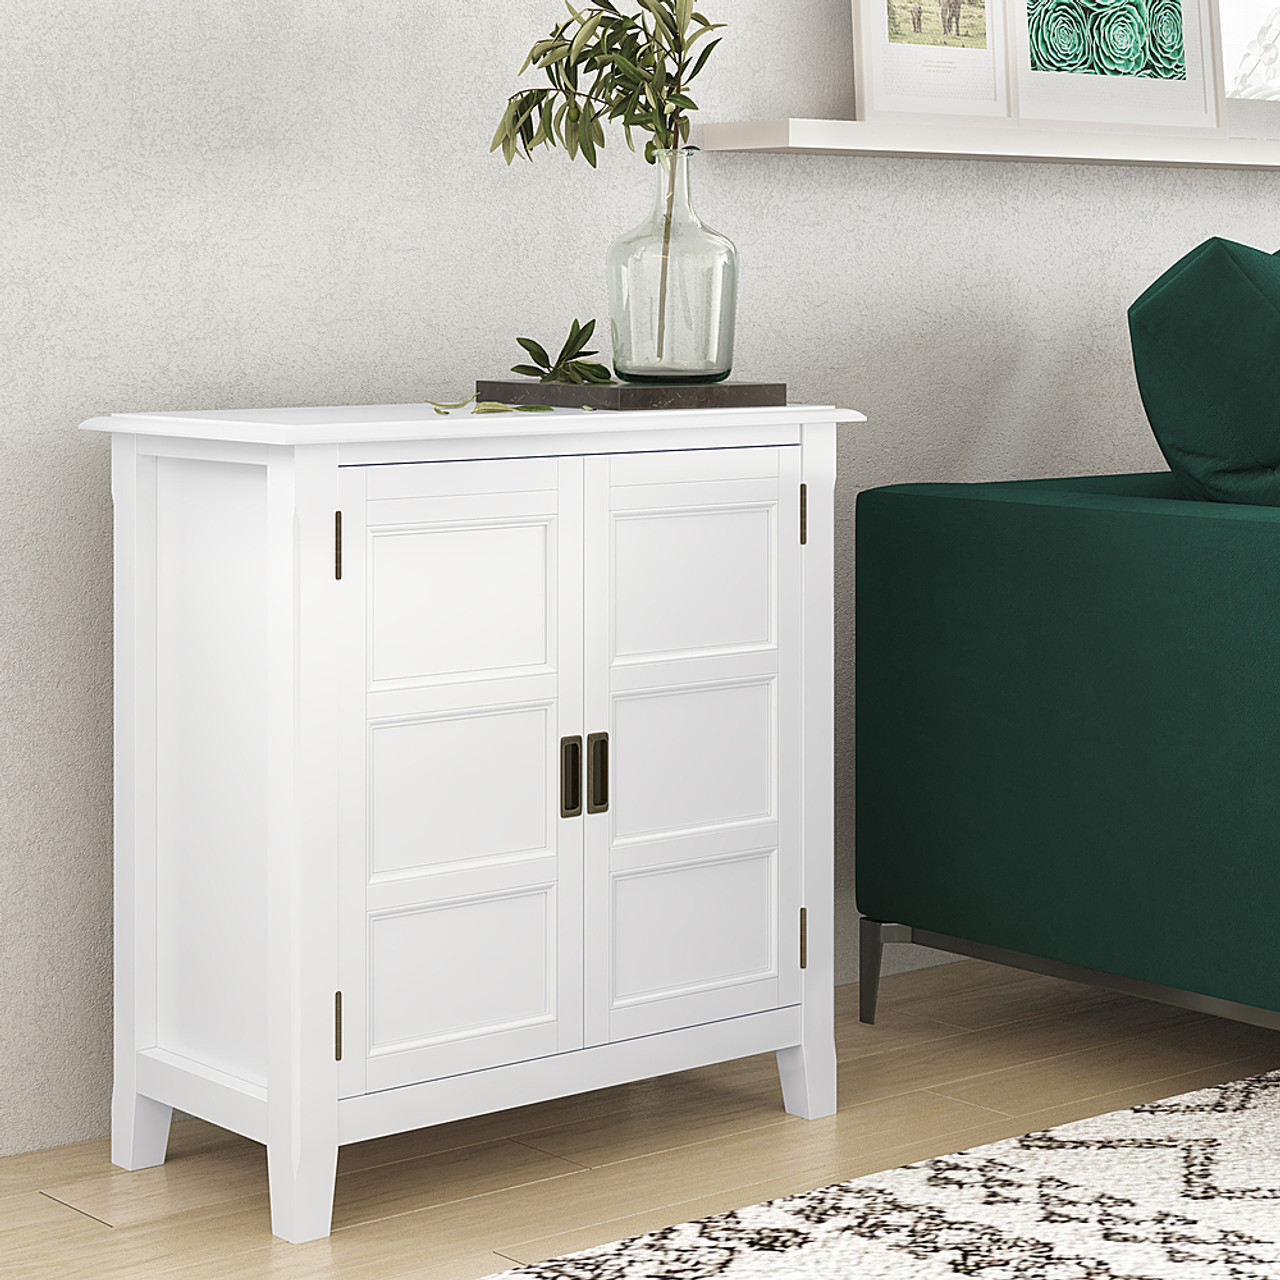 Simpli Home - Burlington SOLID WOOD 30 inch Wide Traditional Low Storage Cabinet in - White